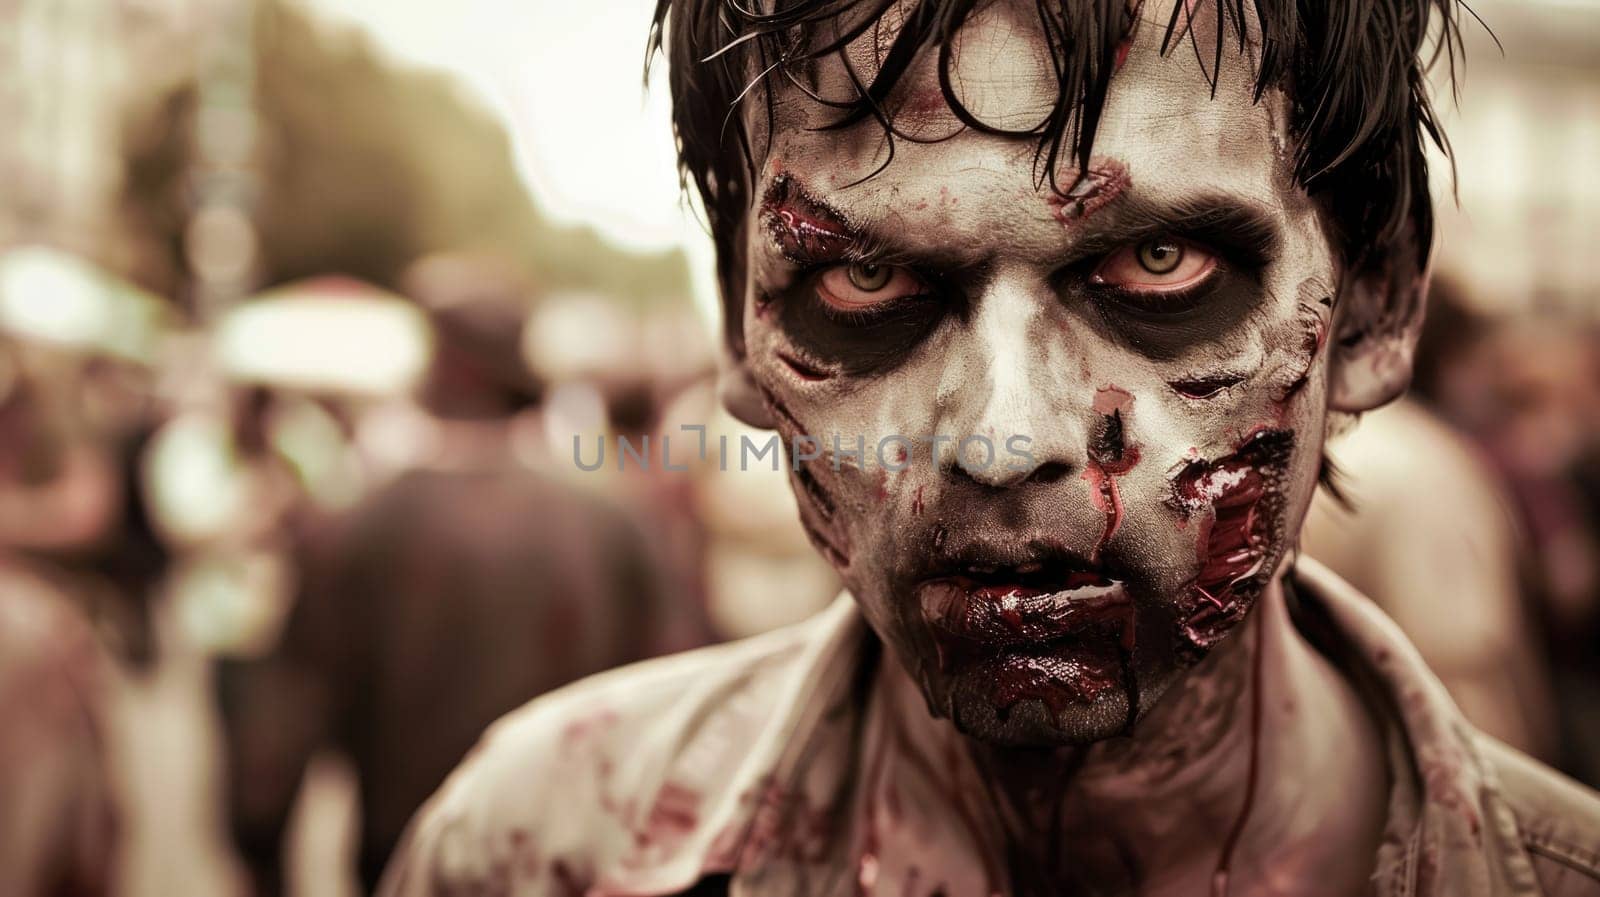 Makeup in zombie style. Professional makeup for filming by natali_brill